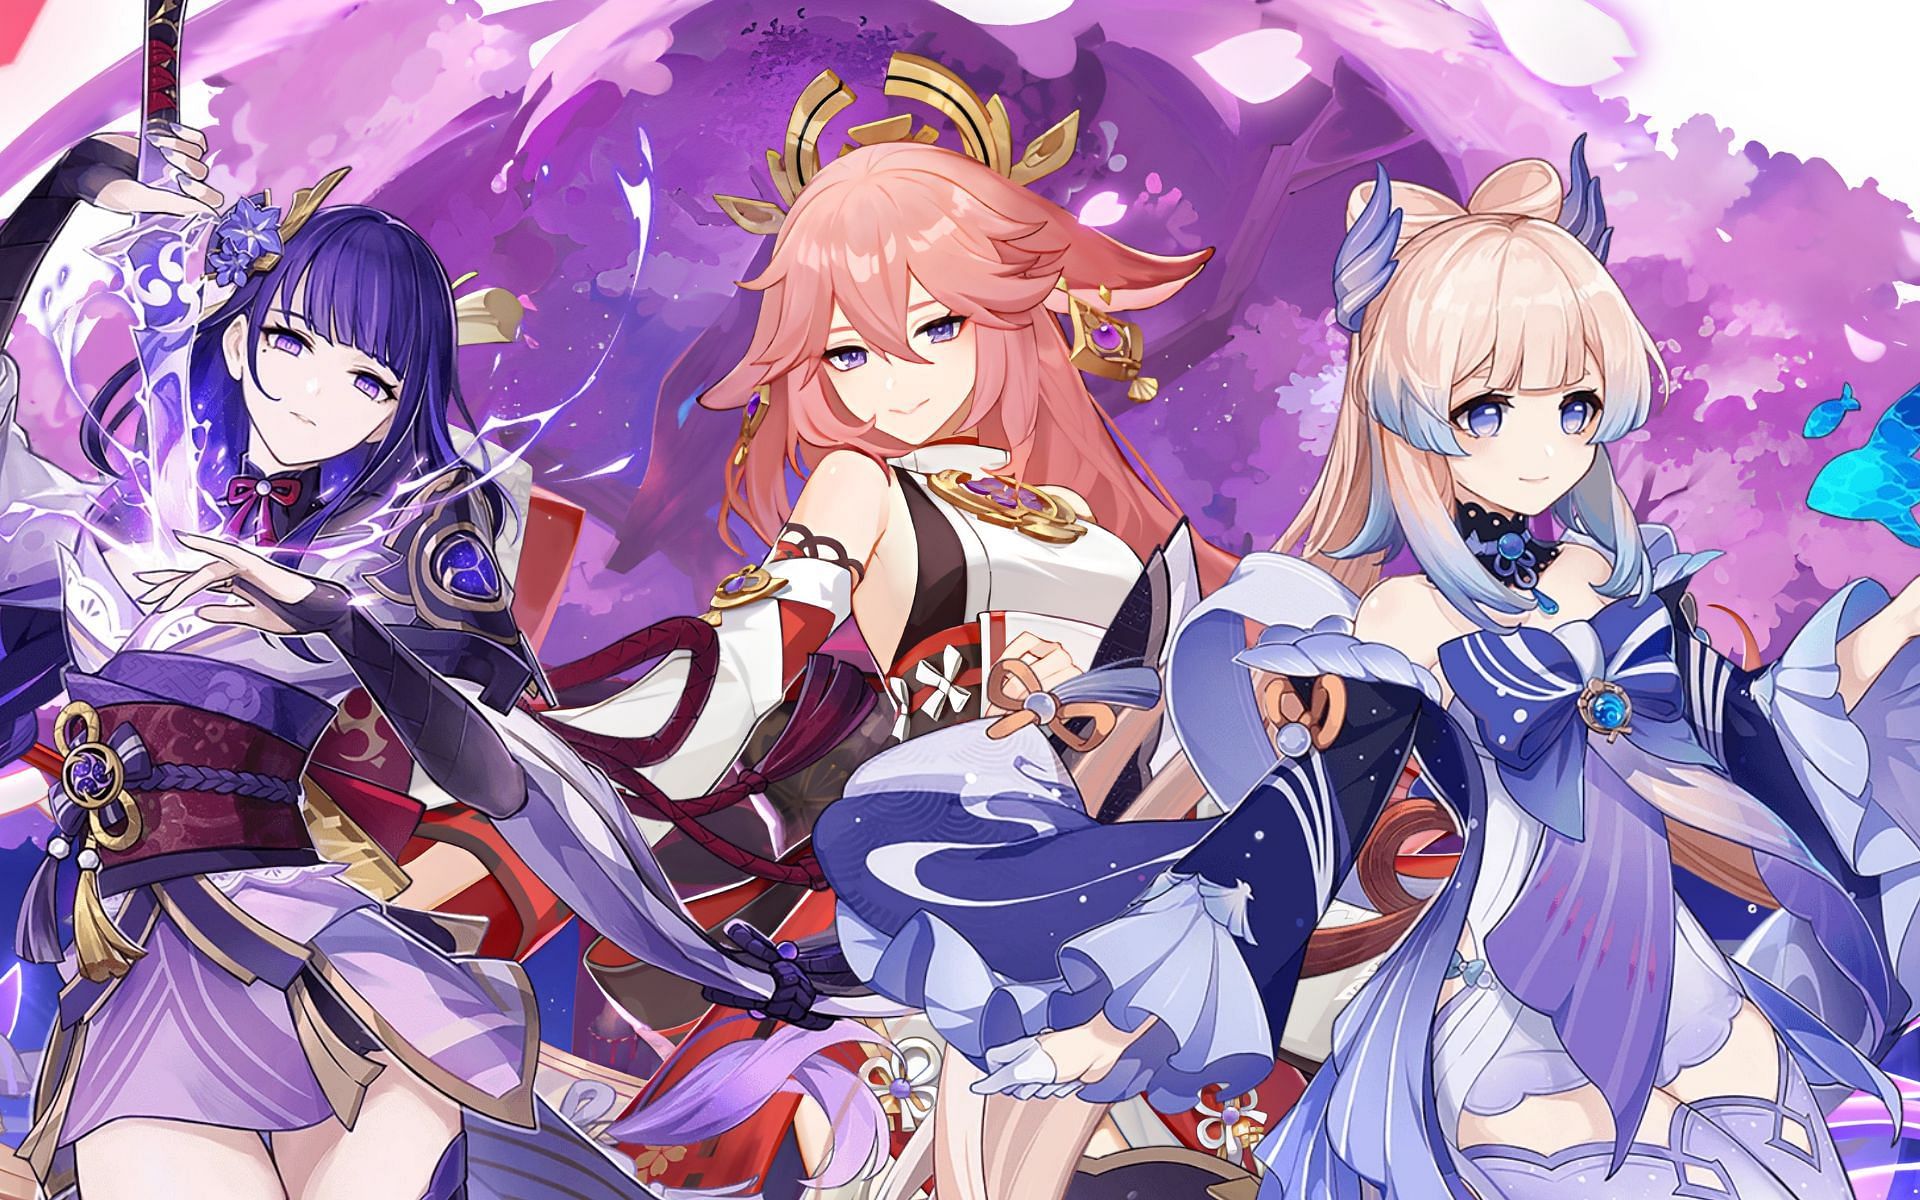 Next Genshin Impact banner Yae Miko release date, time, and 2.5 banner